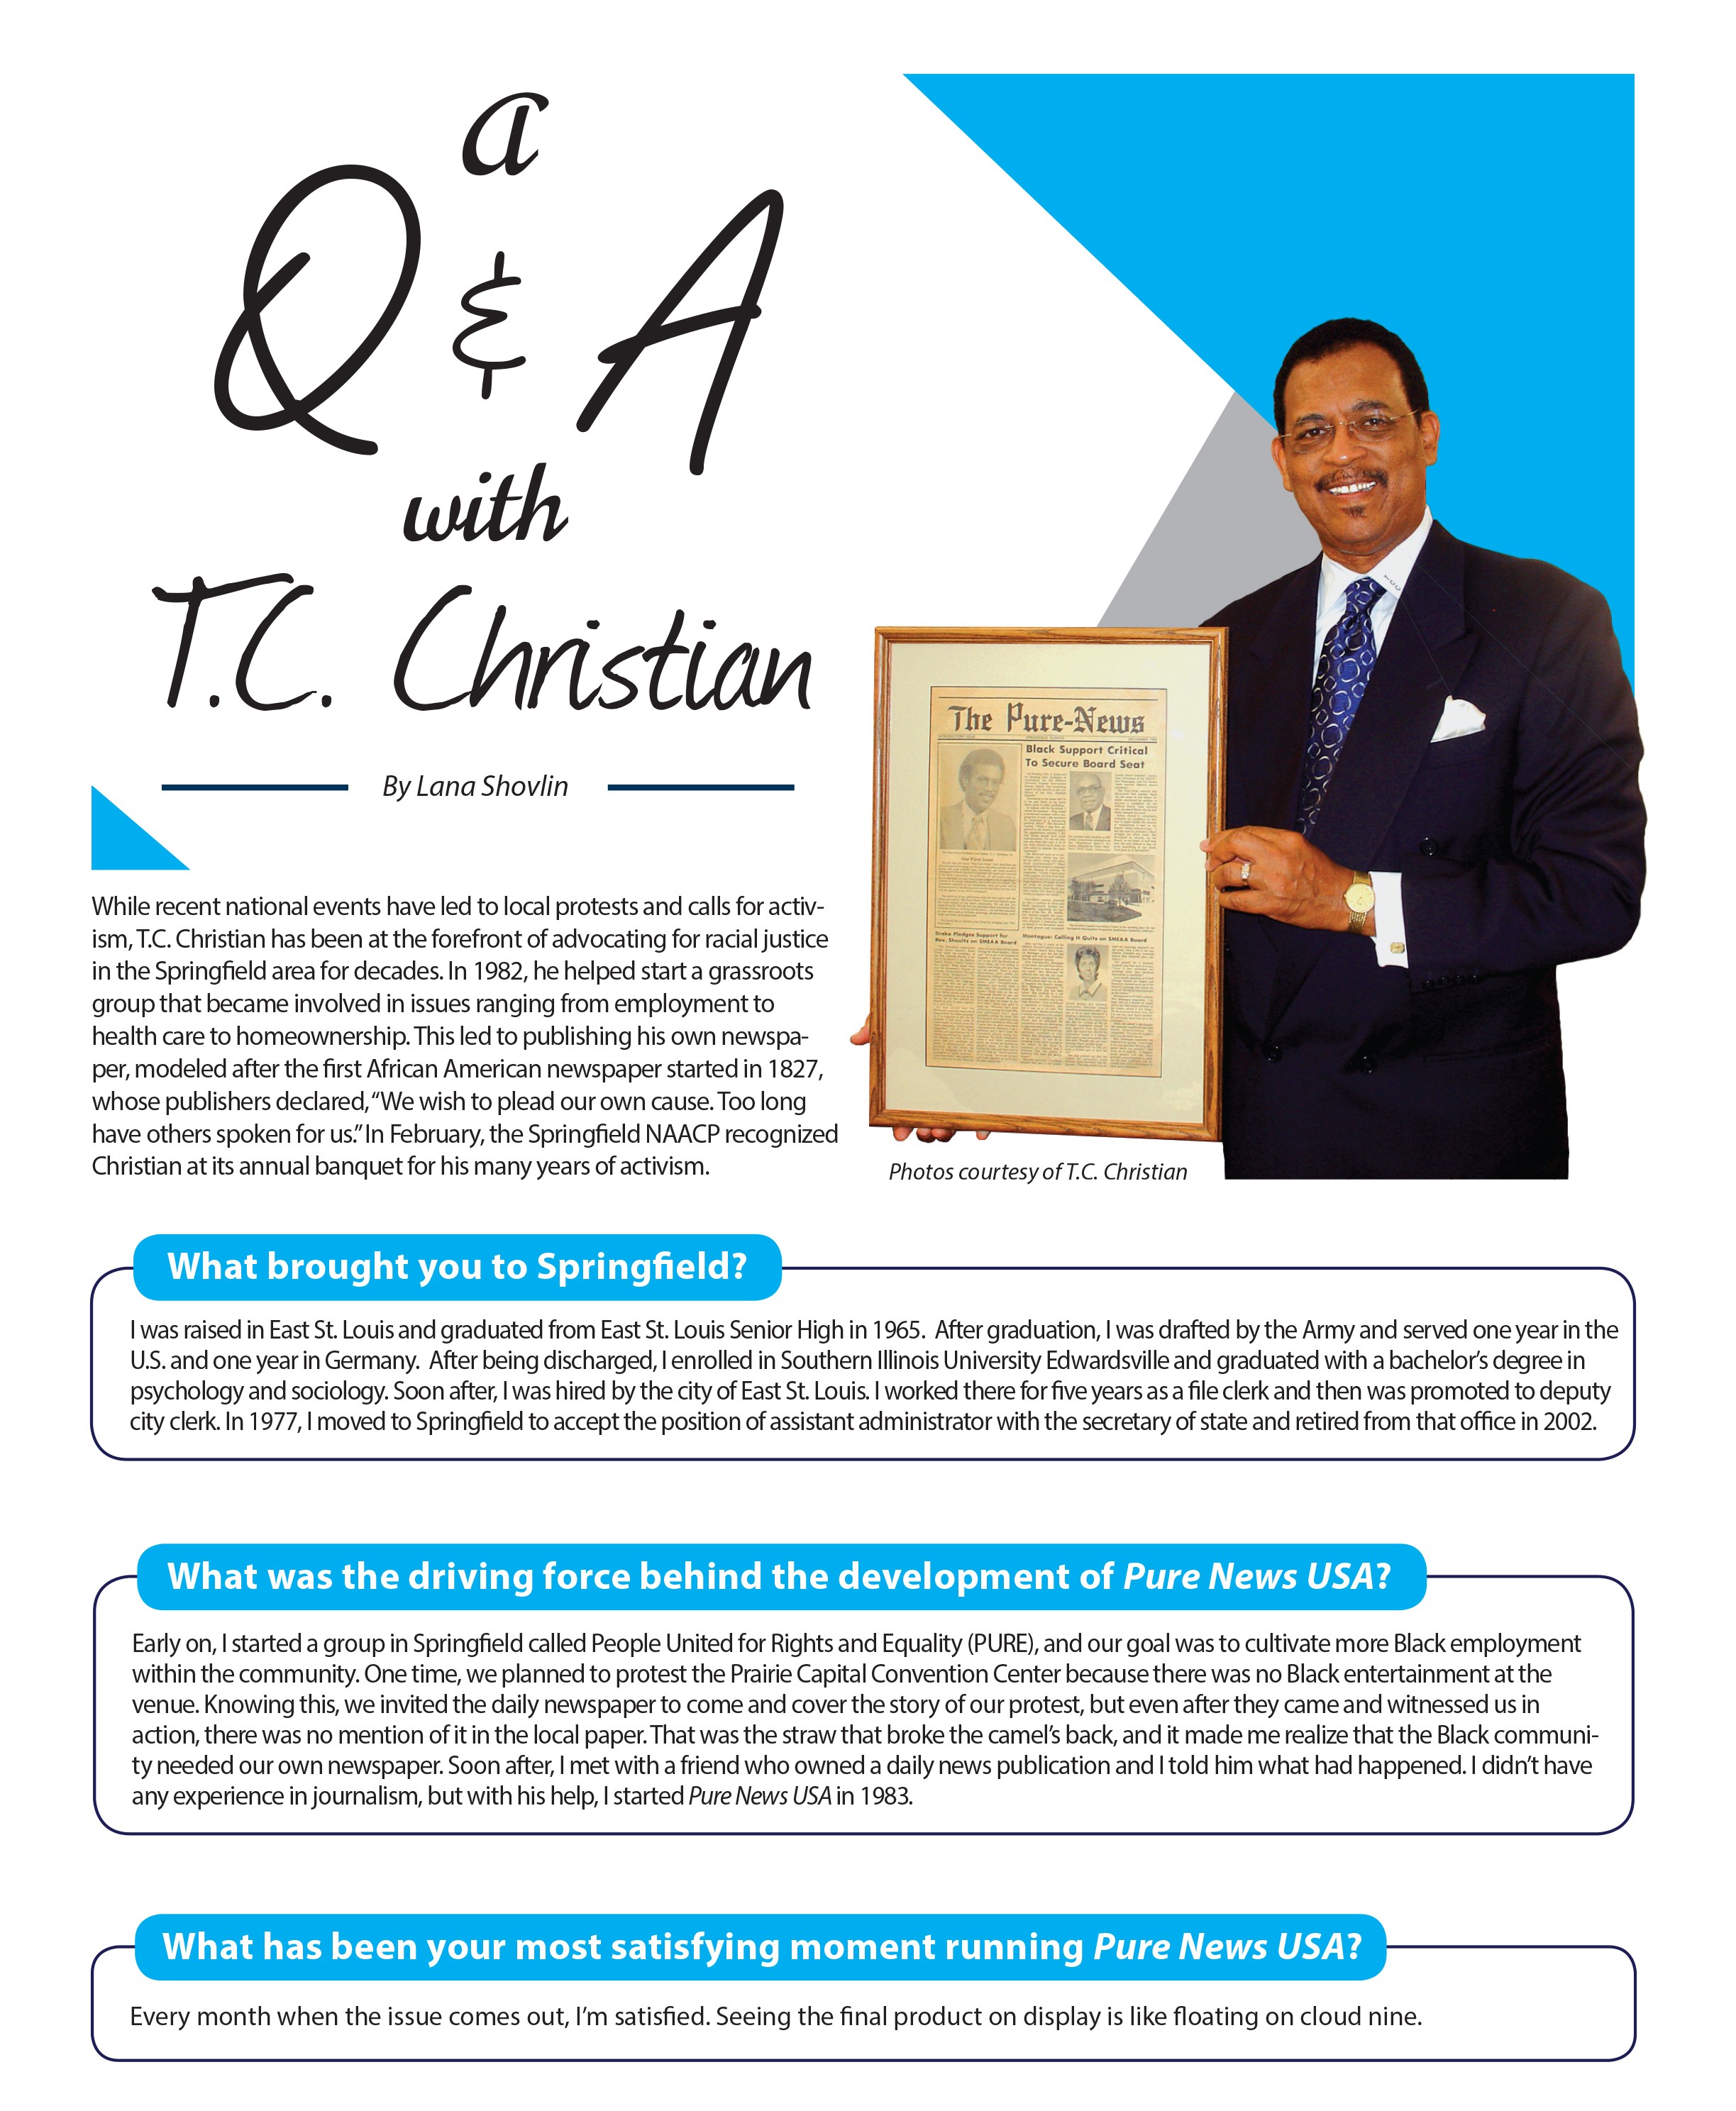 A Q&A with T.C. Christian